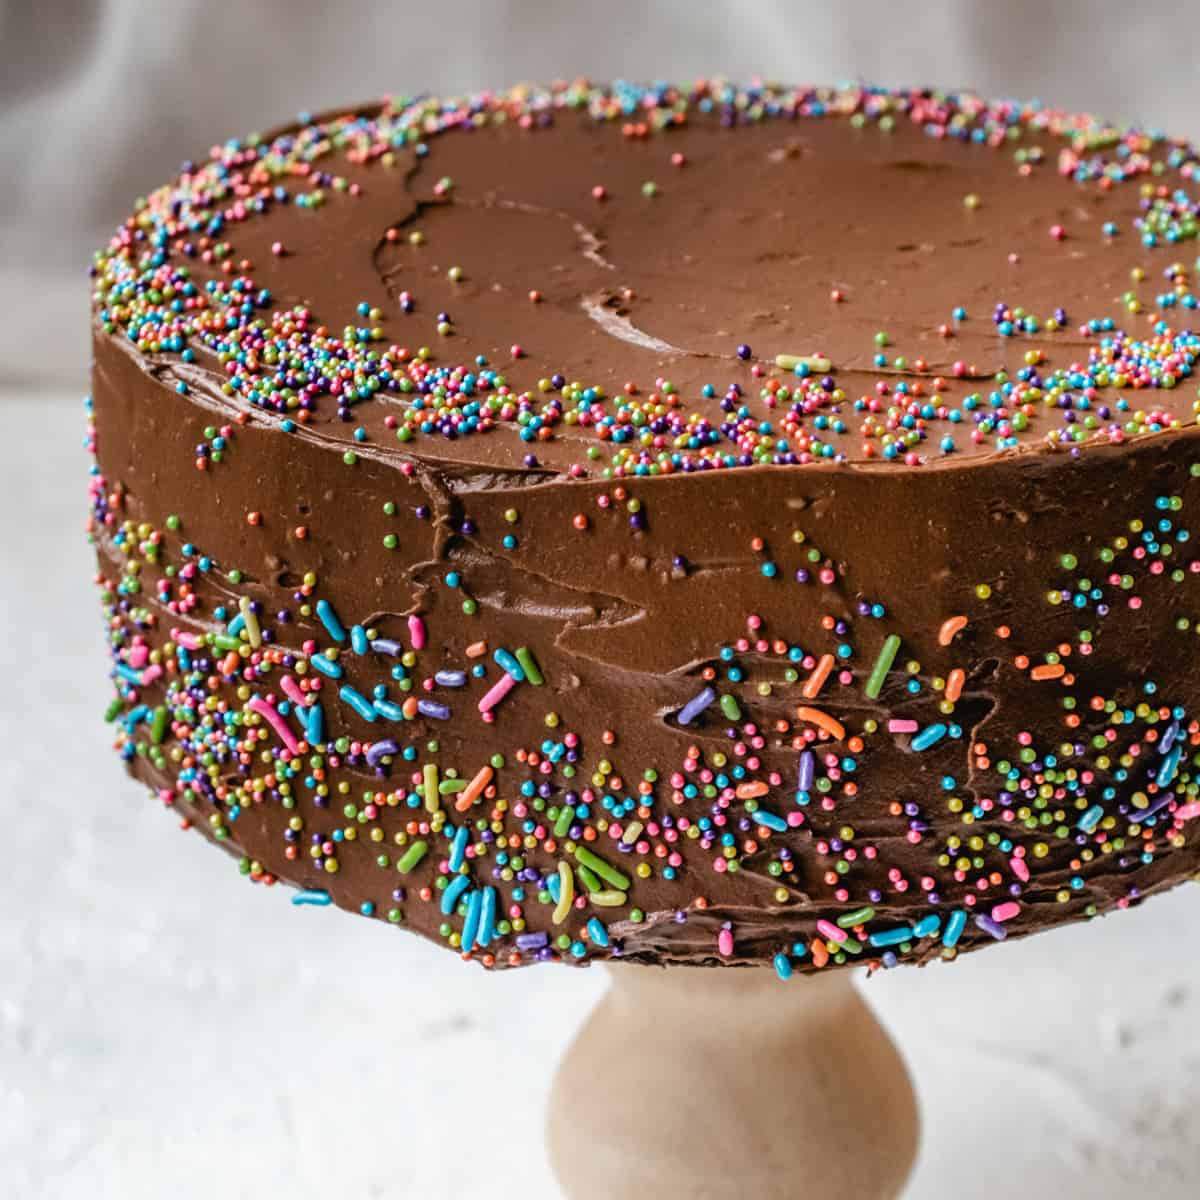 A round, layered chocolate cake with sprinkles on a wooden cake stand.